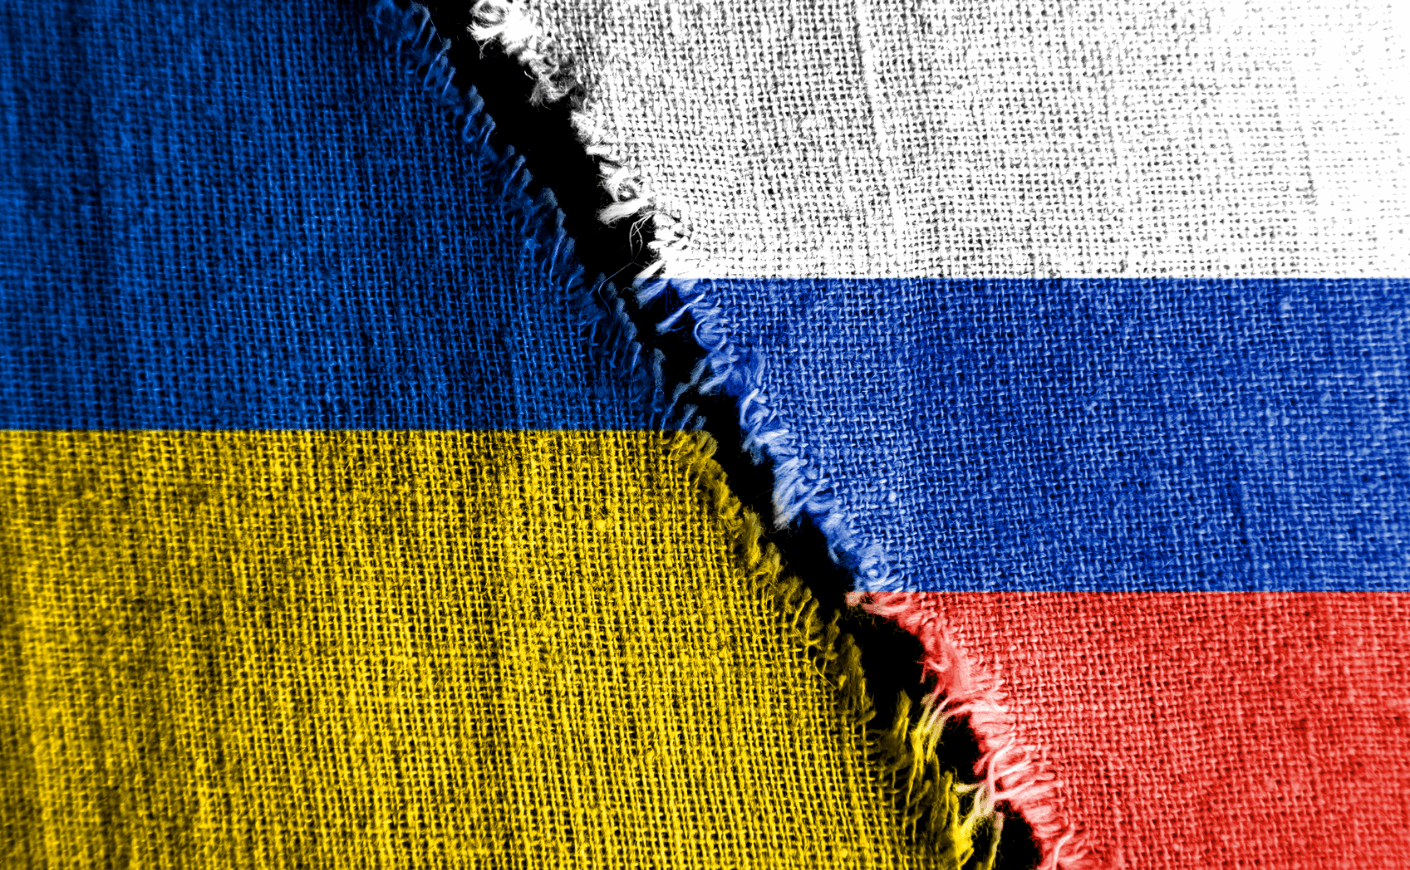 Russian and Ukraine flags torn in the middle